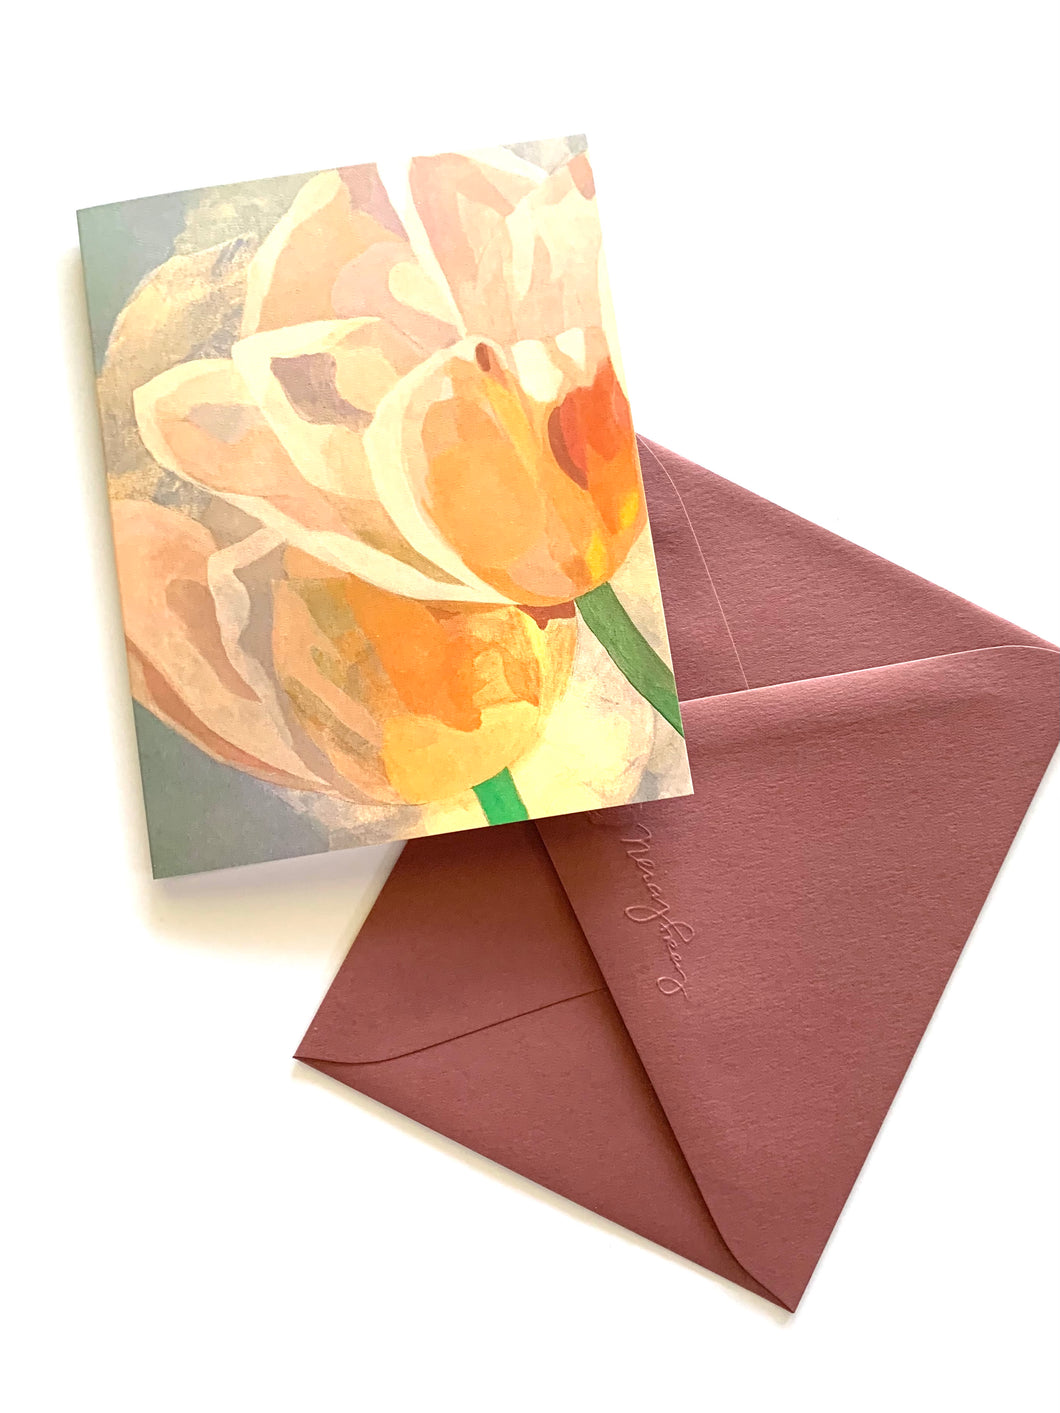 NF GC 011  /  Two Tulips Greeting Card